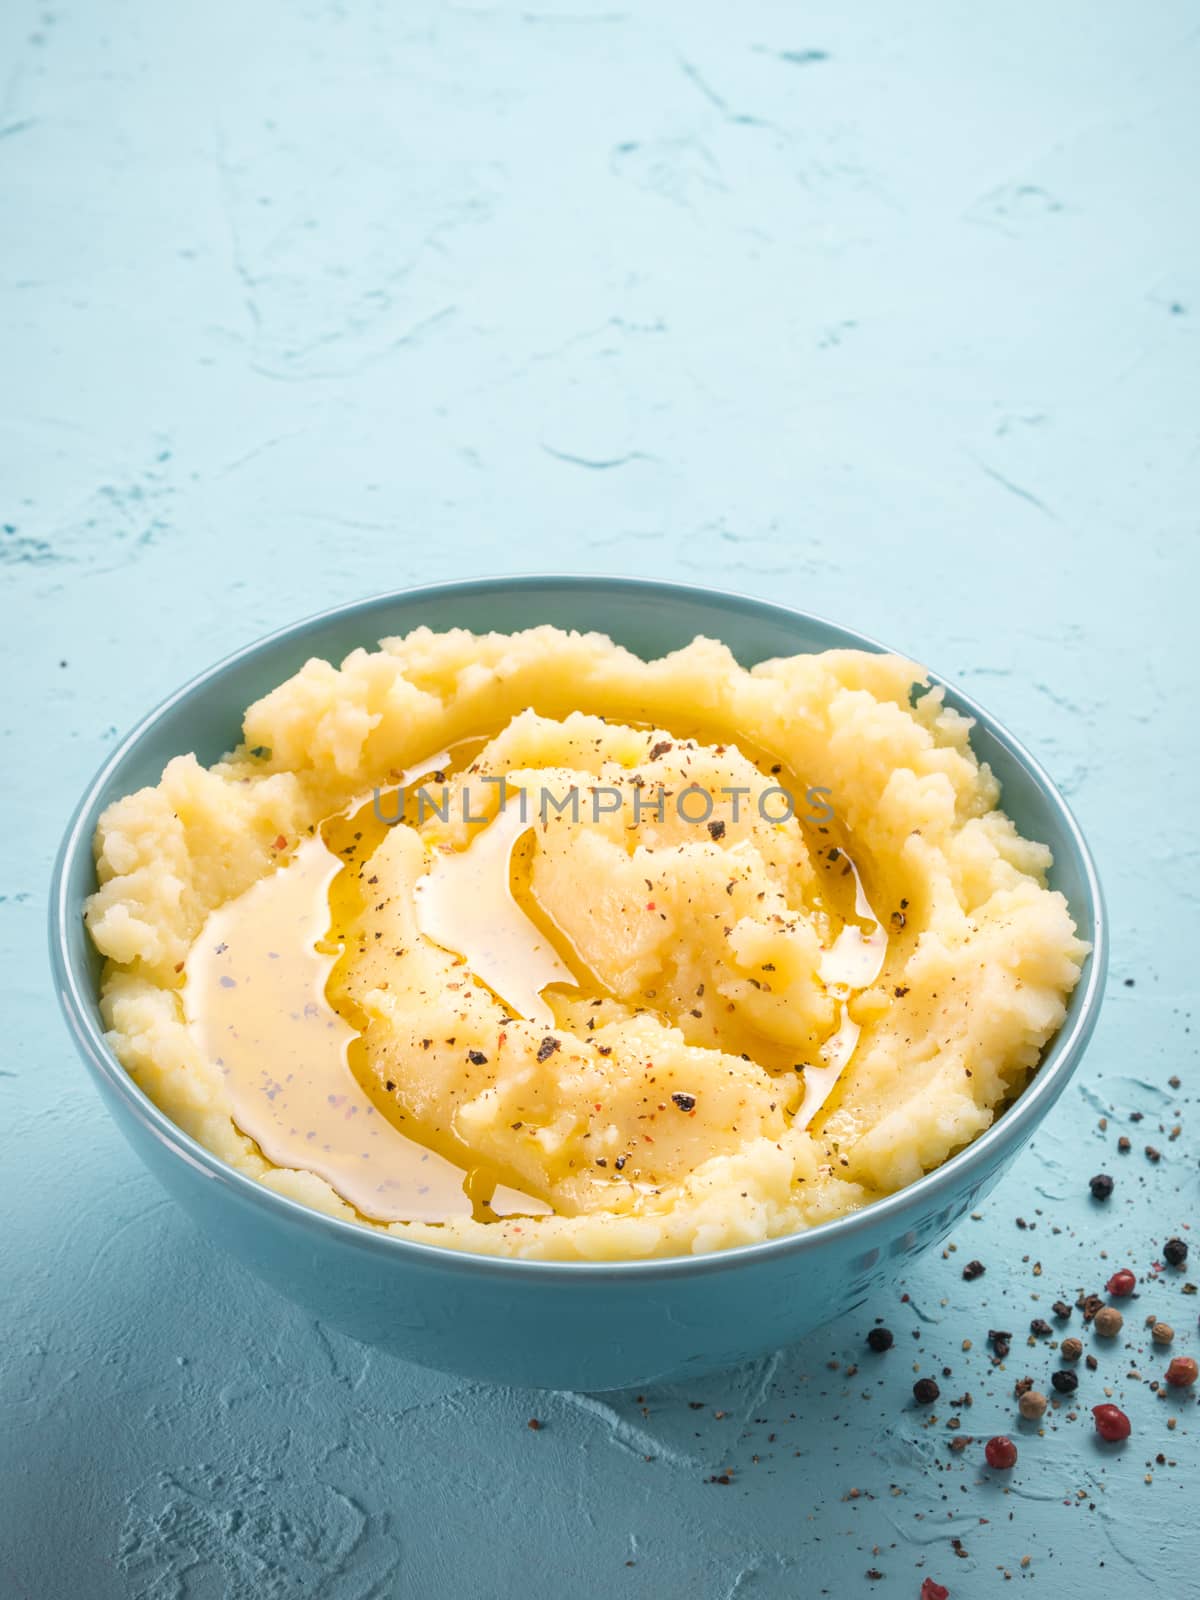 Mashed potatoes with peppers and olive oil in blue bowl on blue concrete background. Vertical.